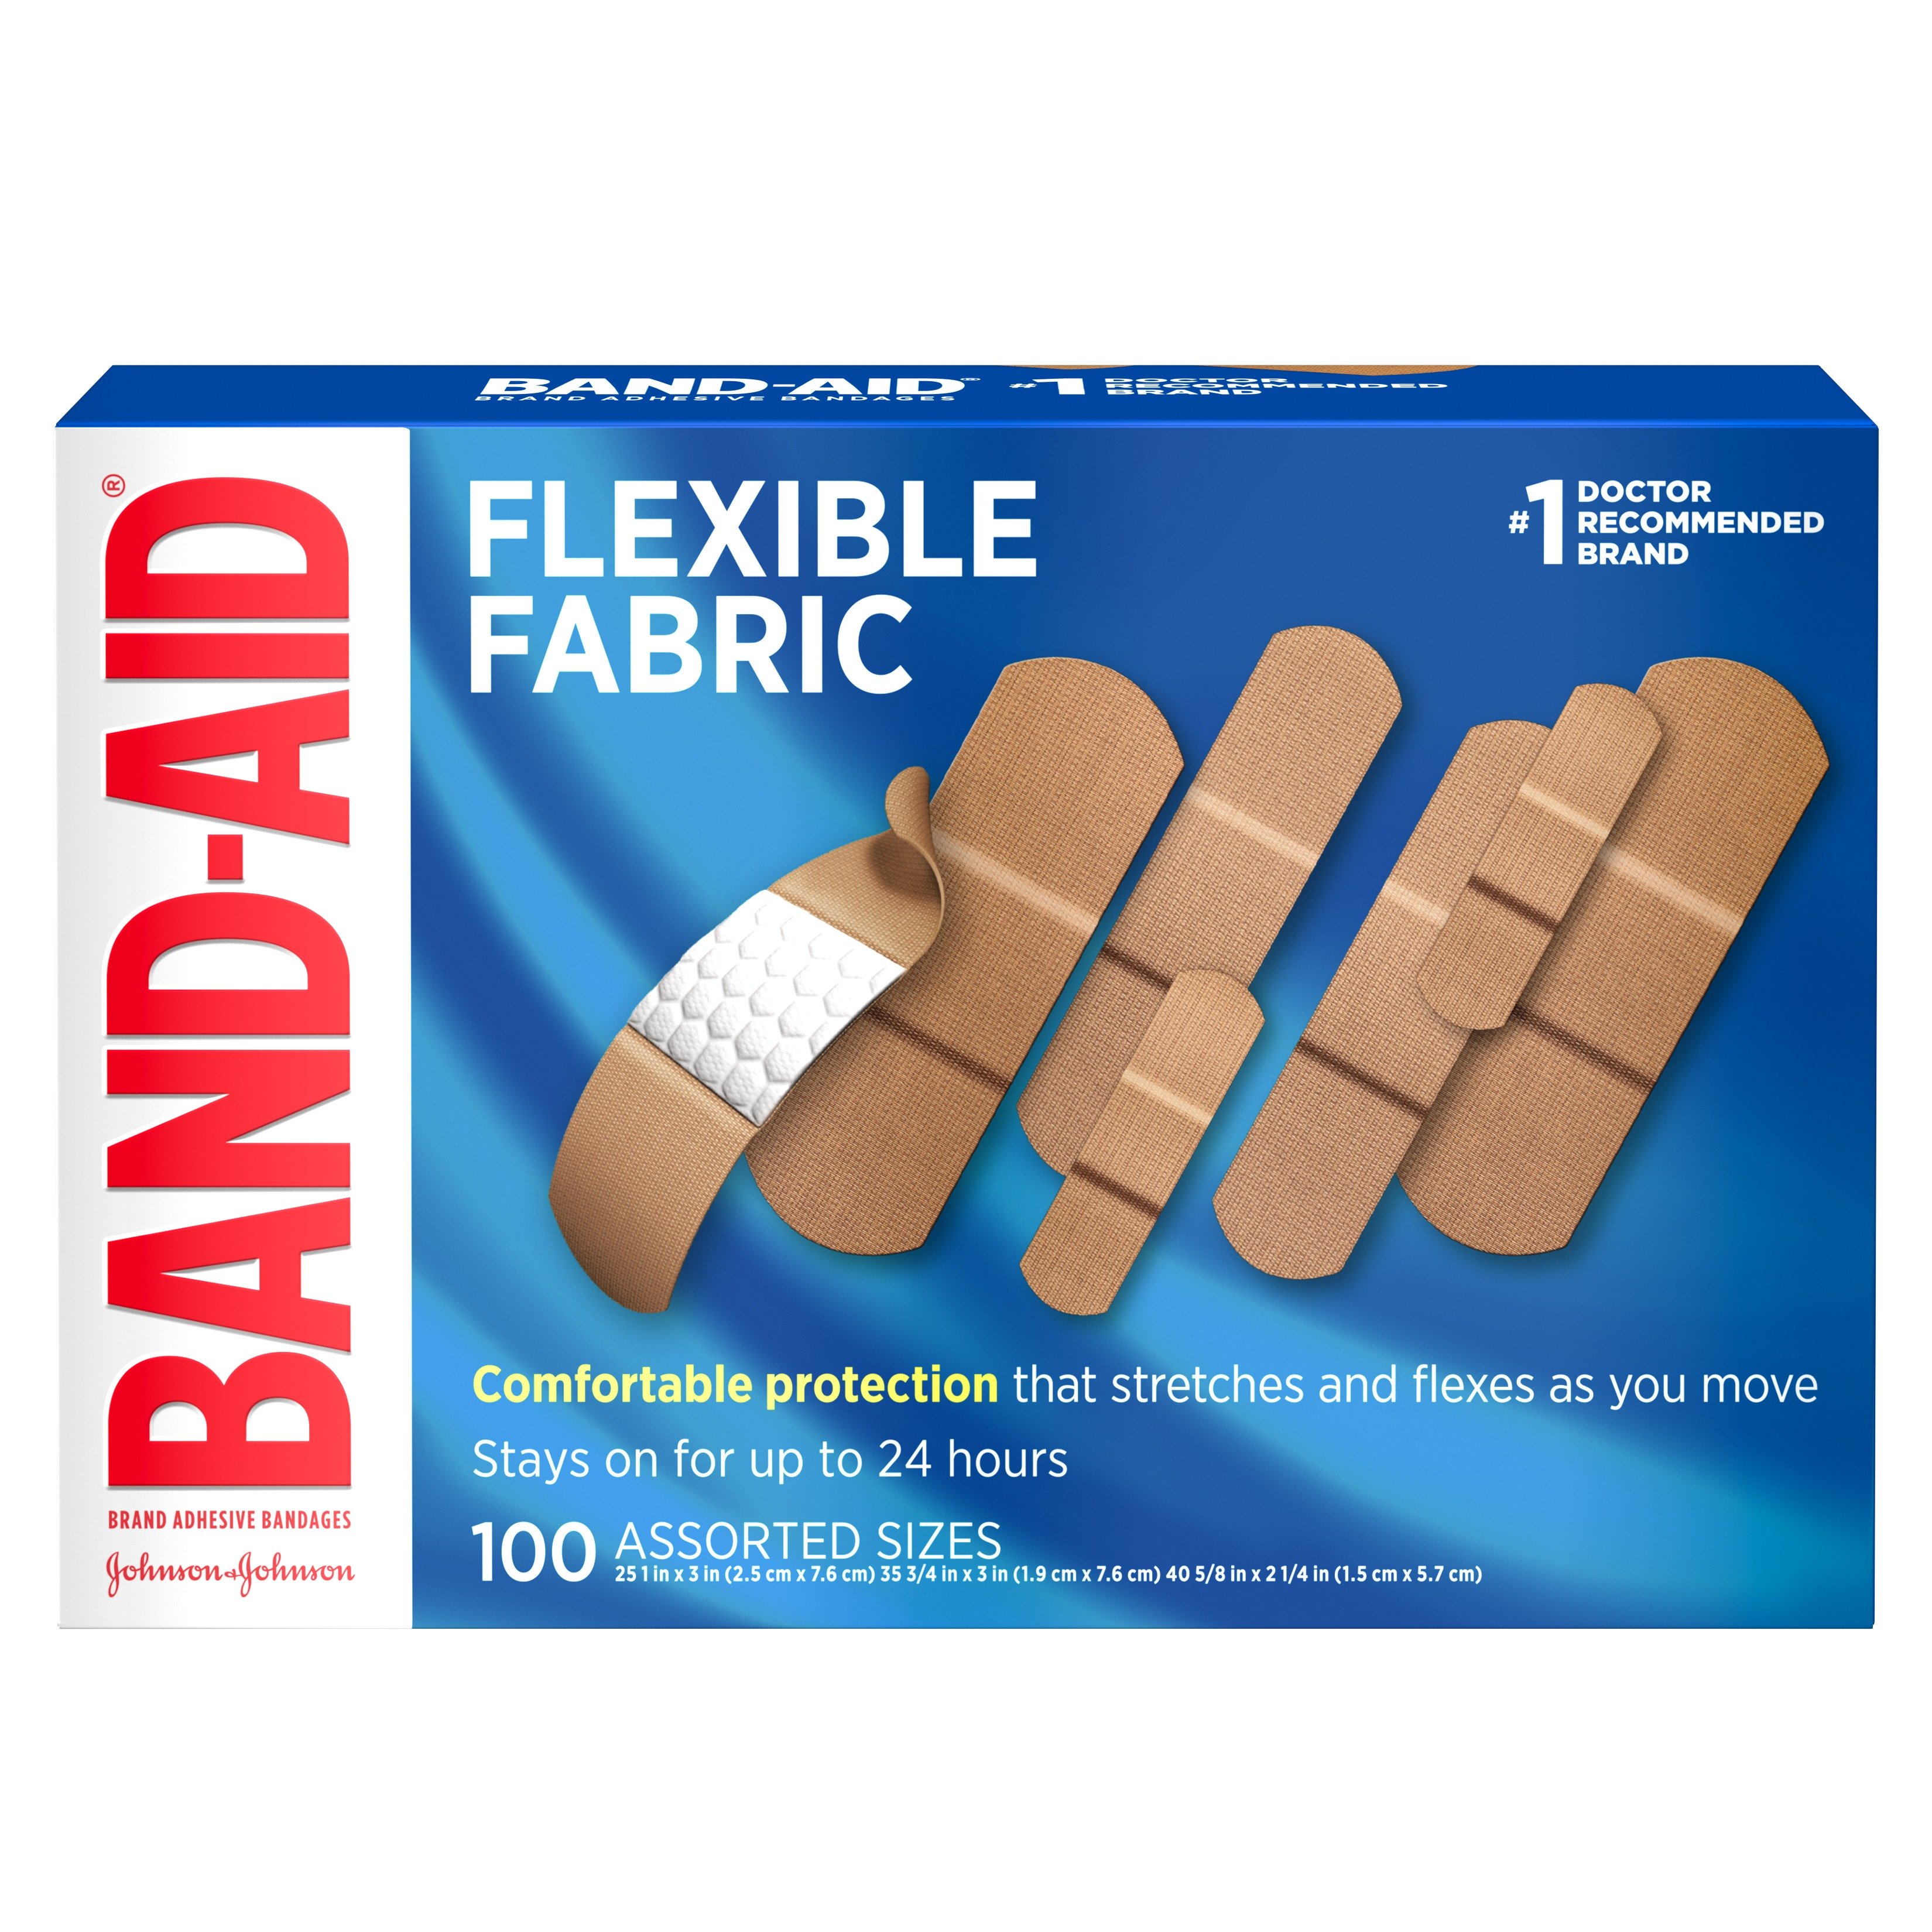 Well Adhesive Strips, Wound Closure, One Size - 30 strips